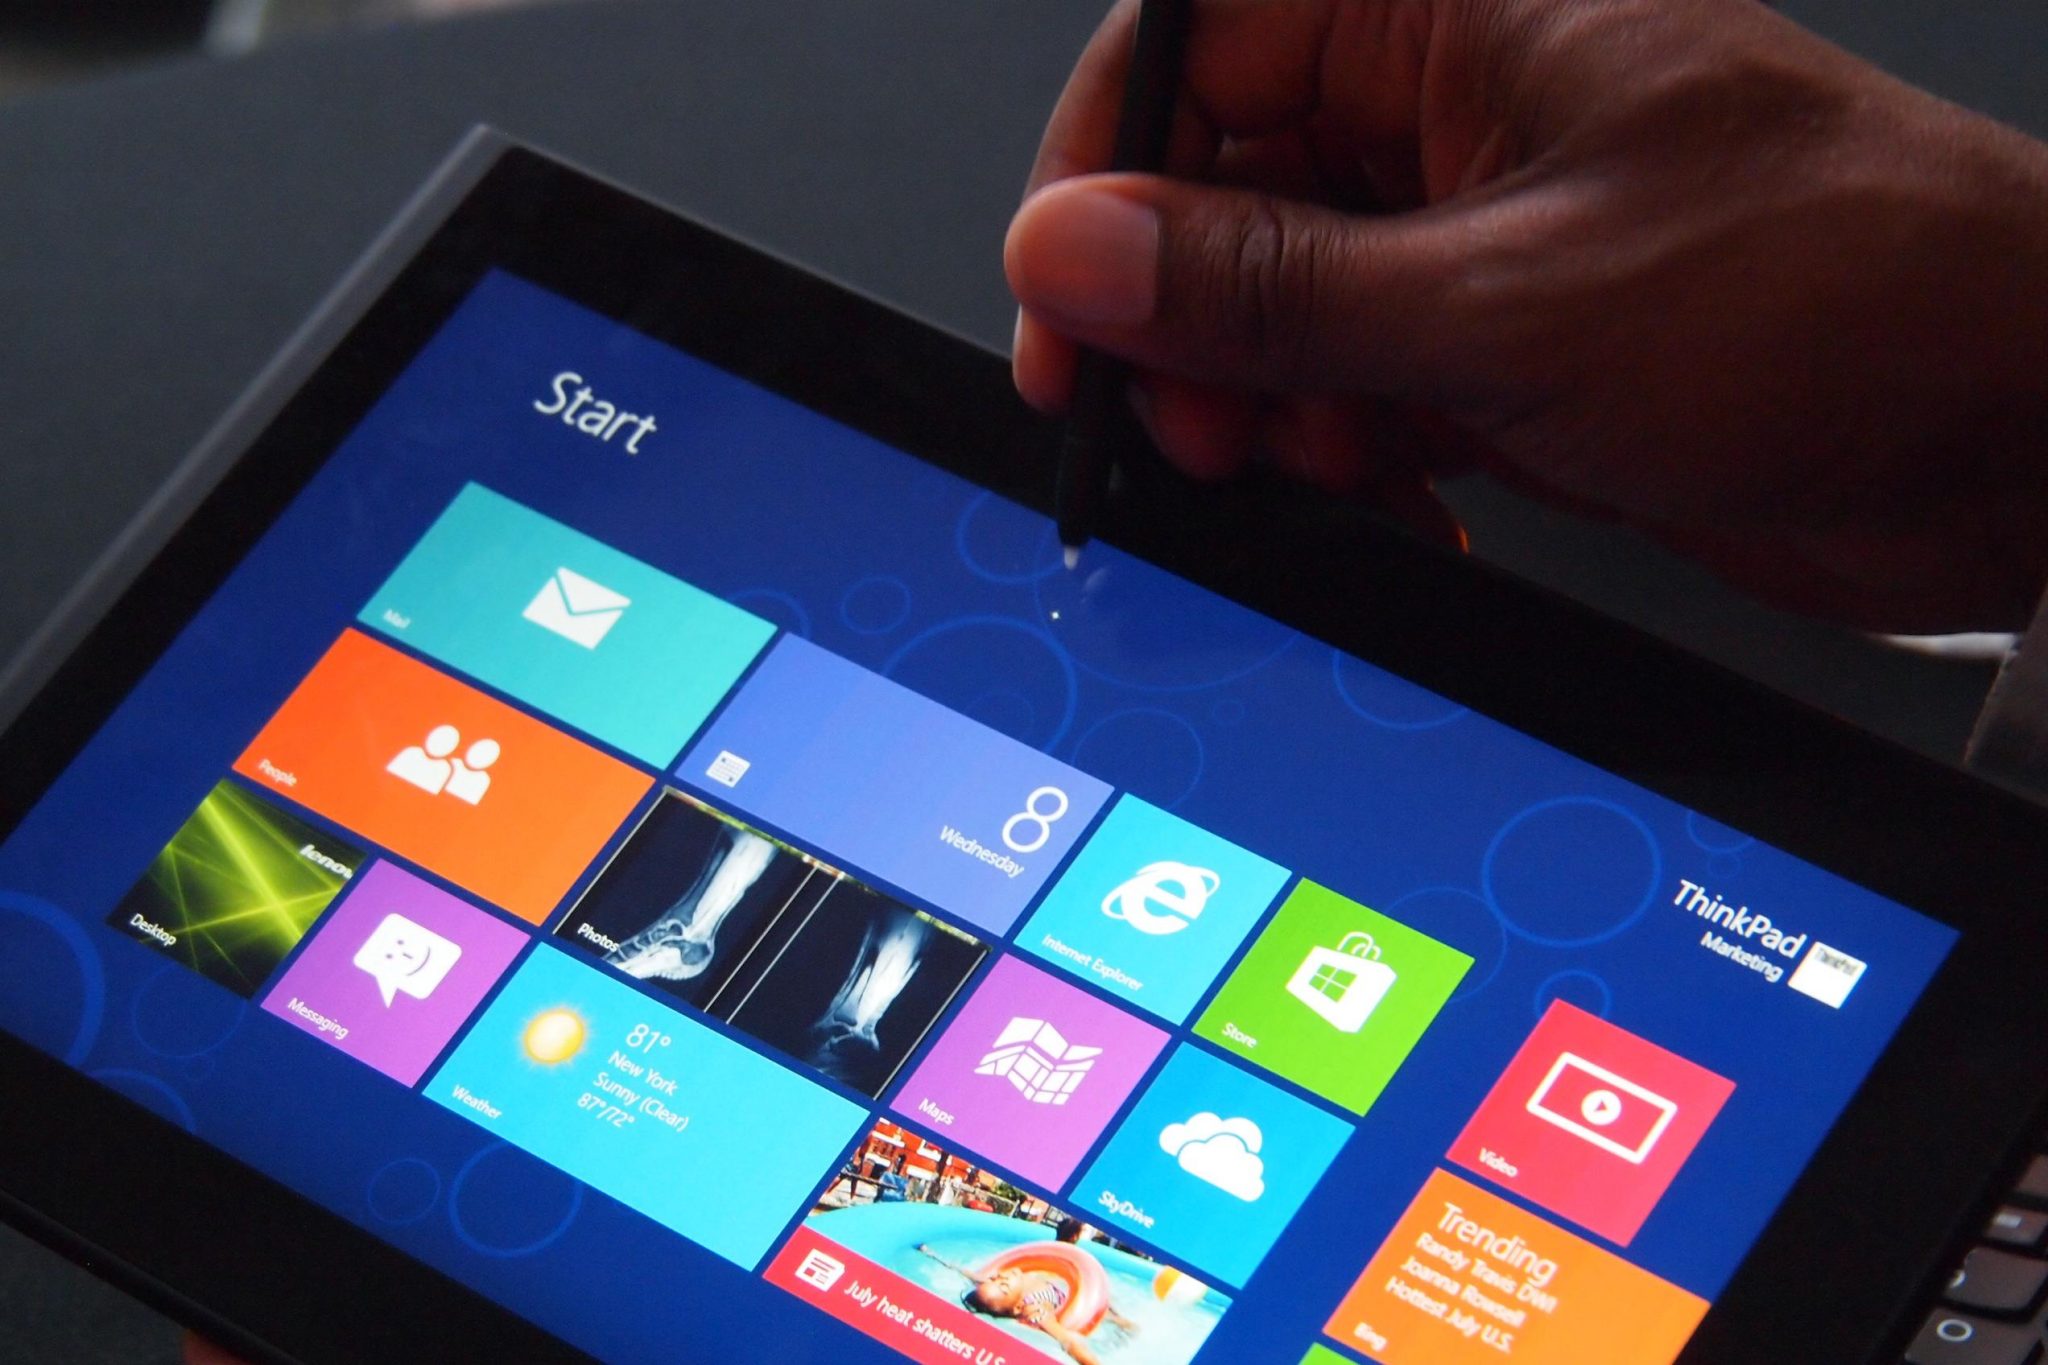 Windows 8 Tablet Release Date And Price